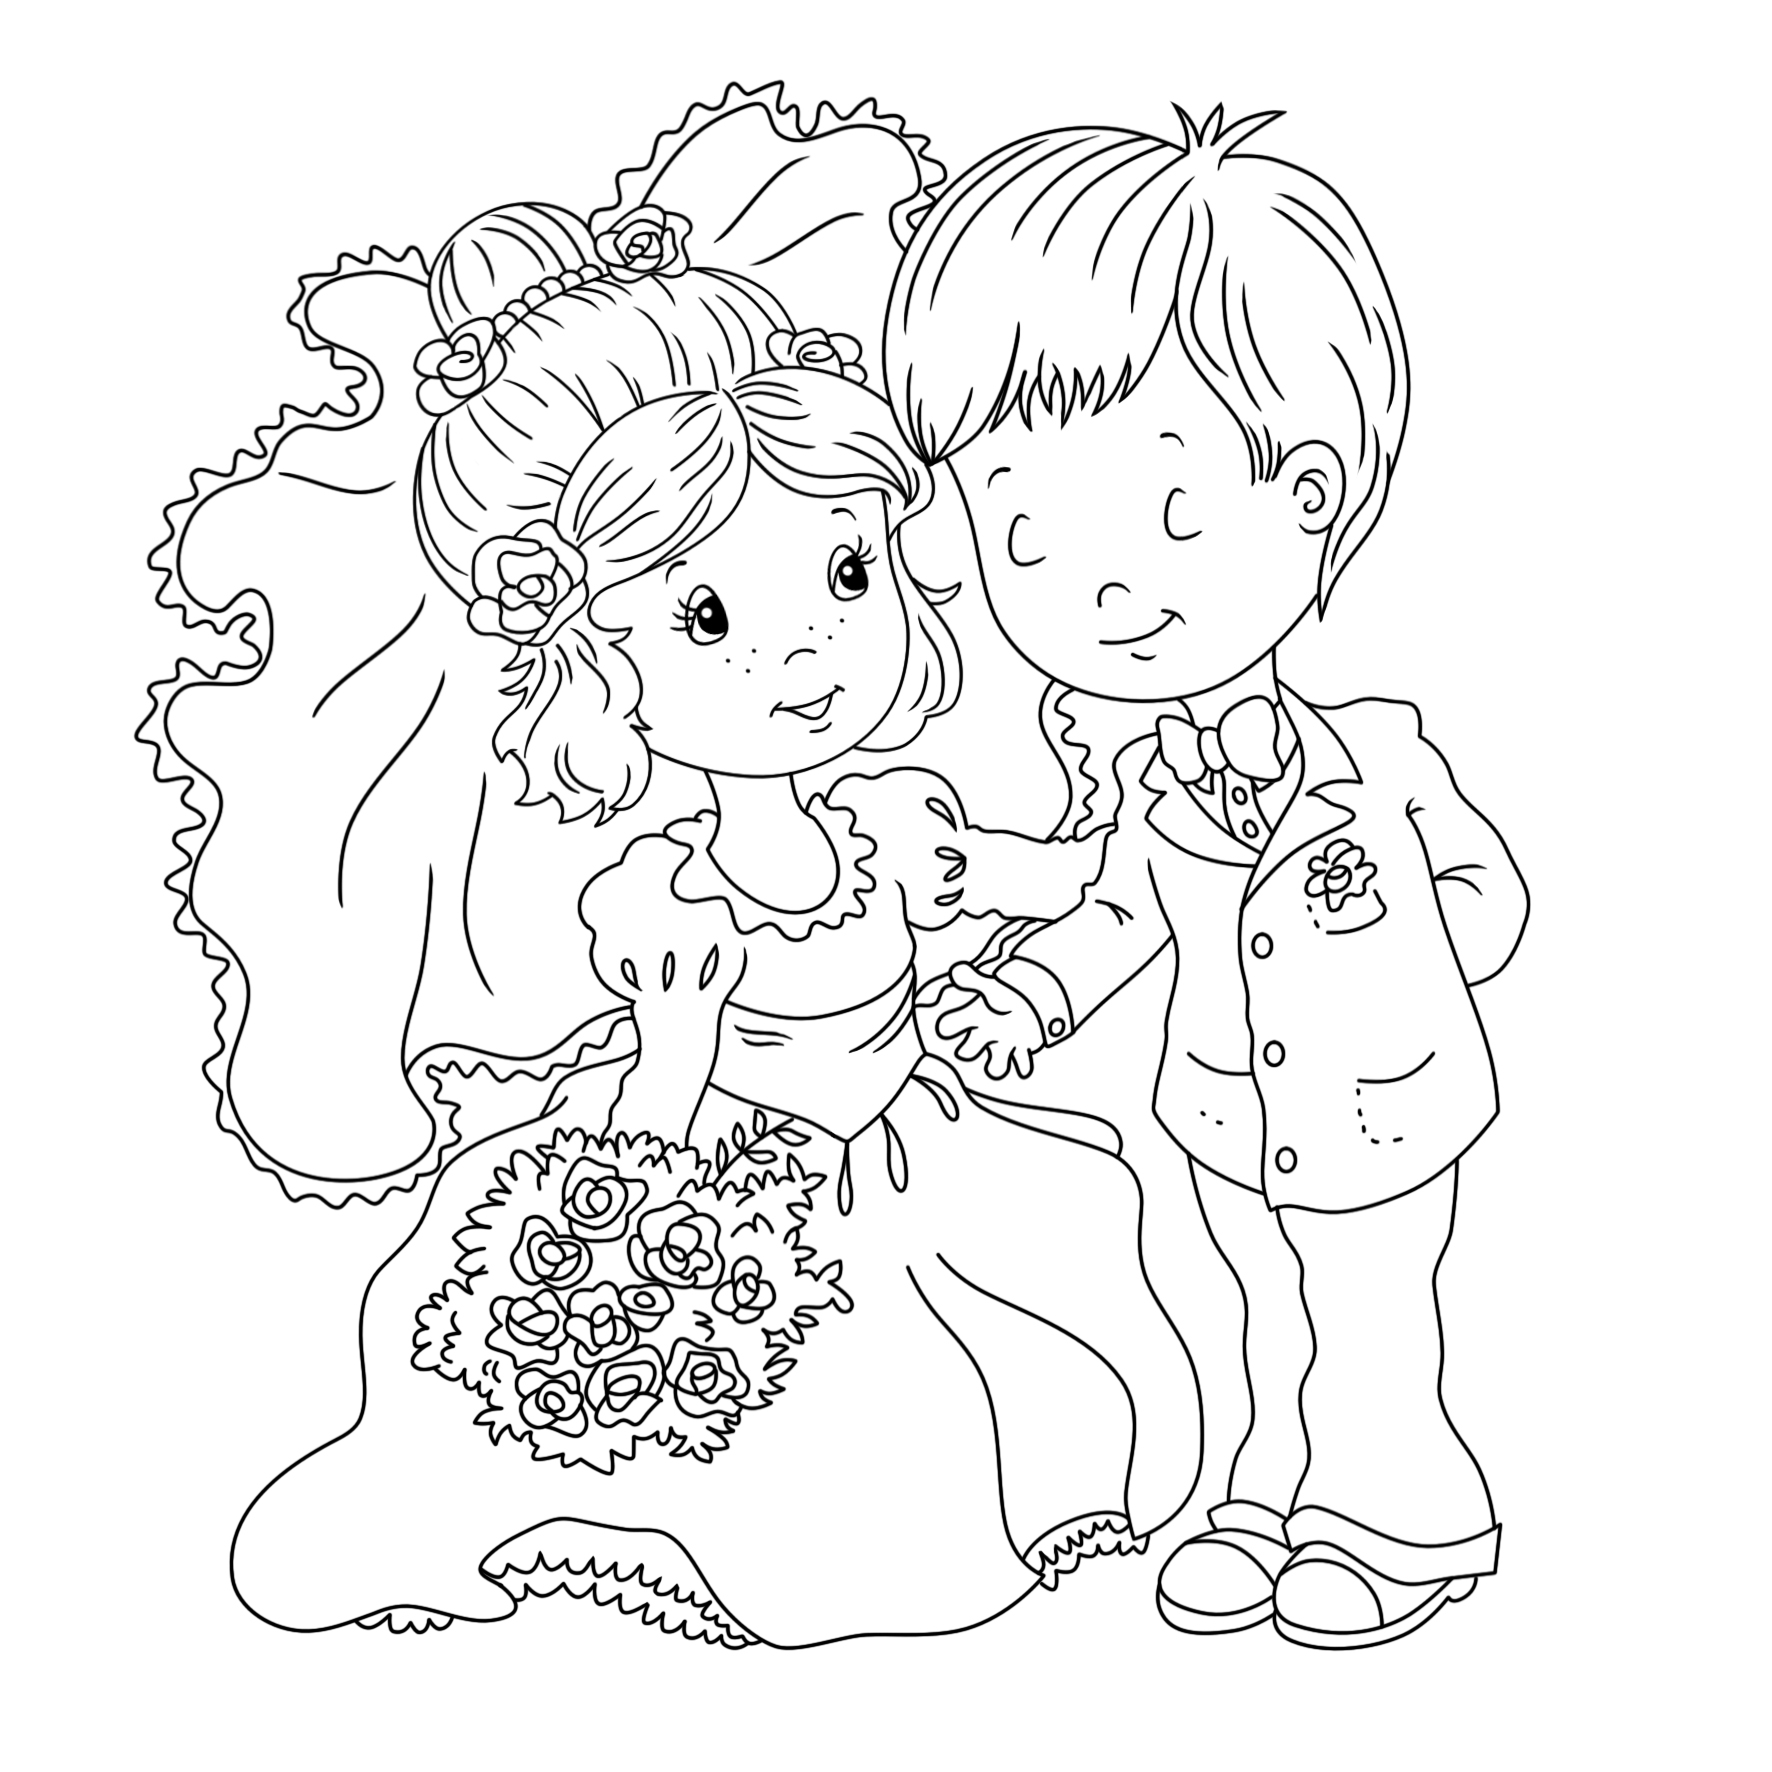 Wedding Coloring Book for Kids, Teens and Adults!: Now includes a digital  download version of the Wedding Coloring Book!